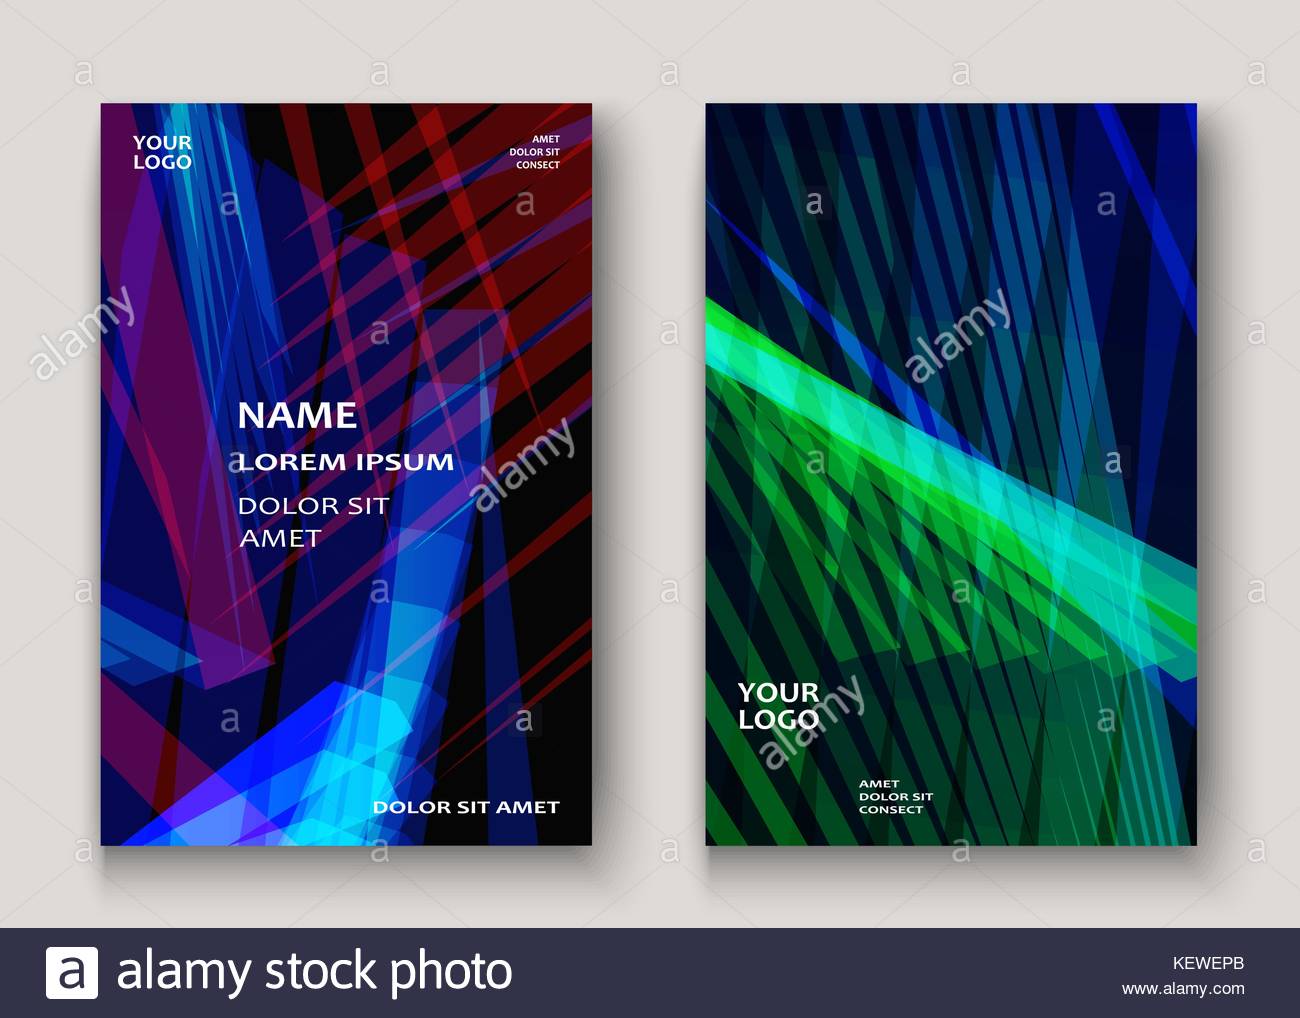 Modern Technology Striped Abstract Covers Design Neon Lines Stock